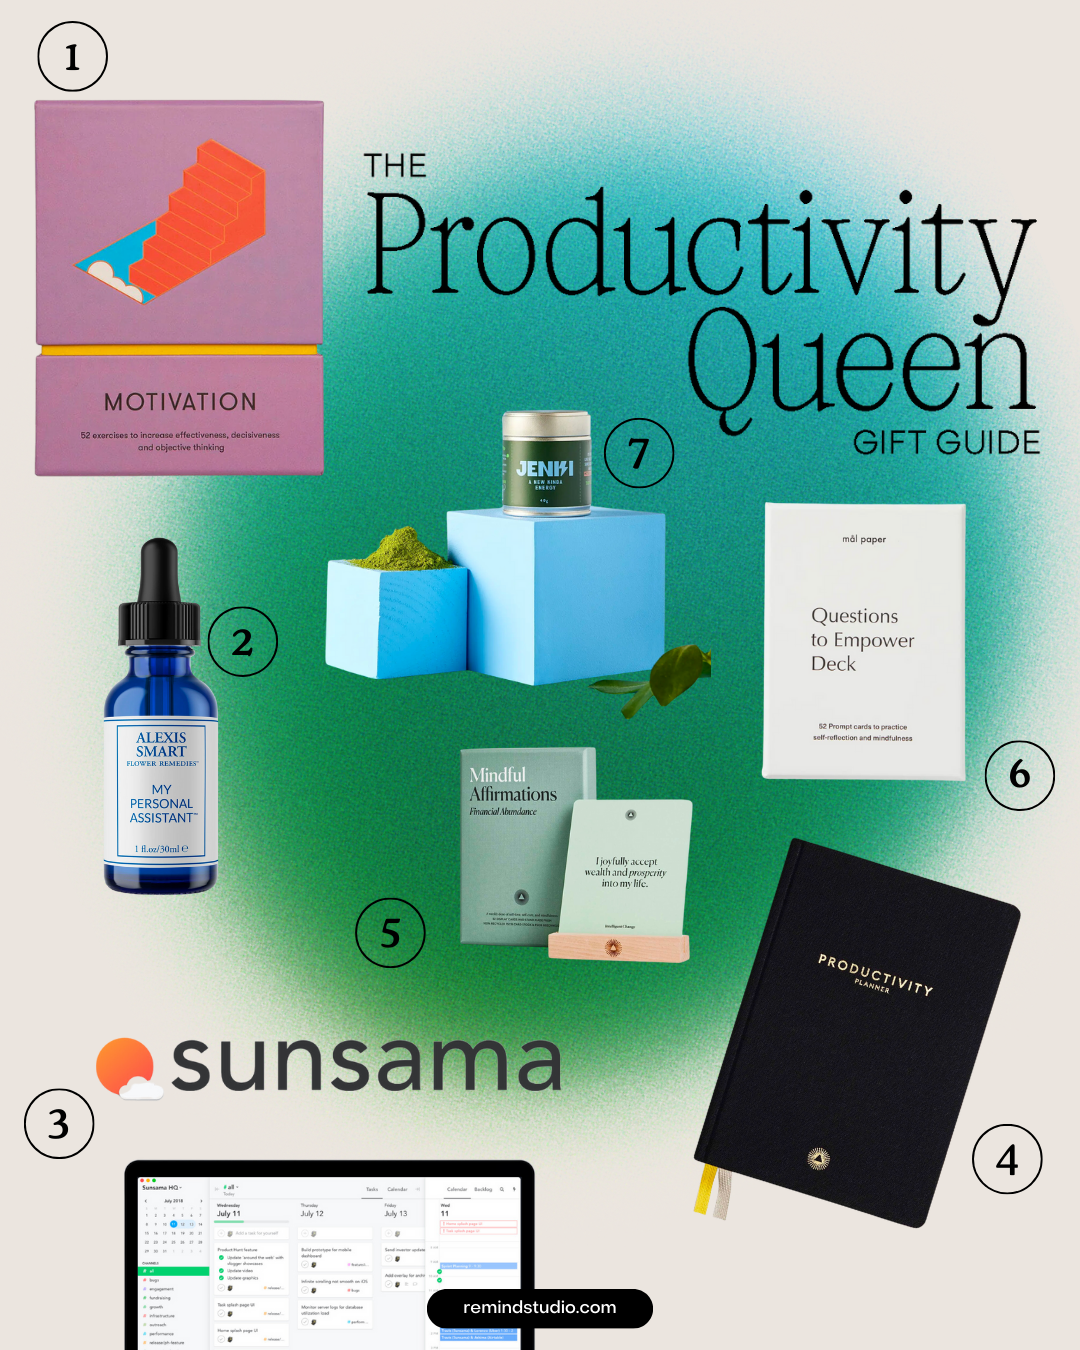 The Productivity Queen Gift Guide